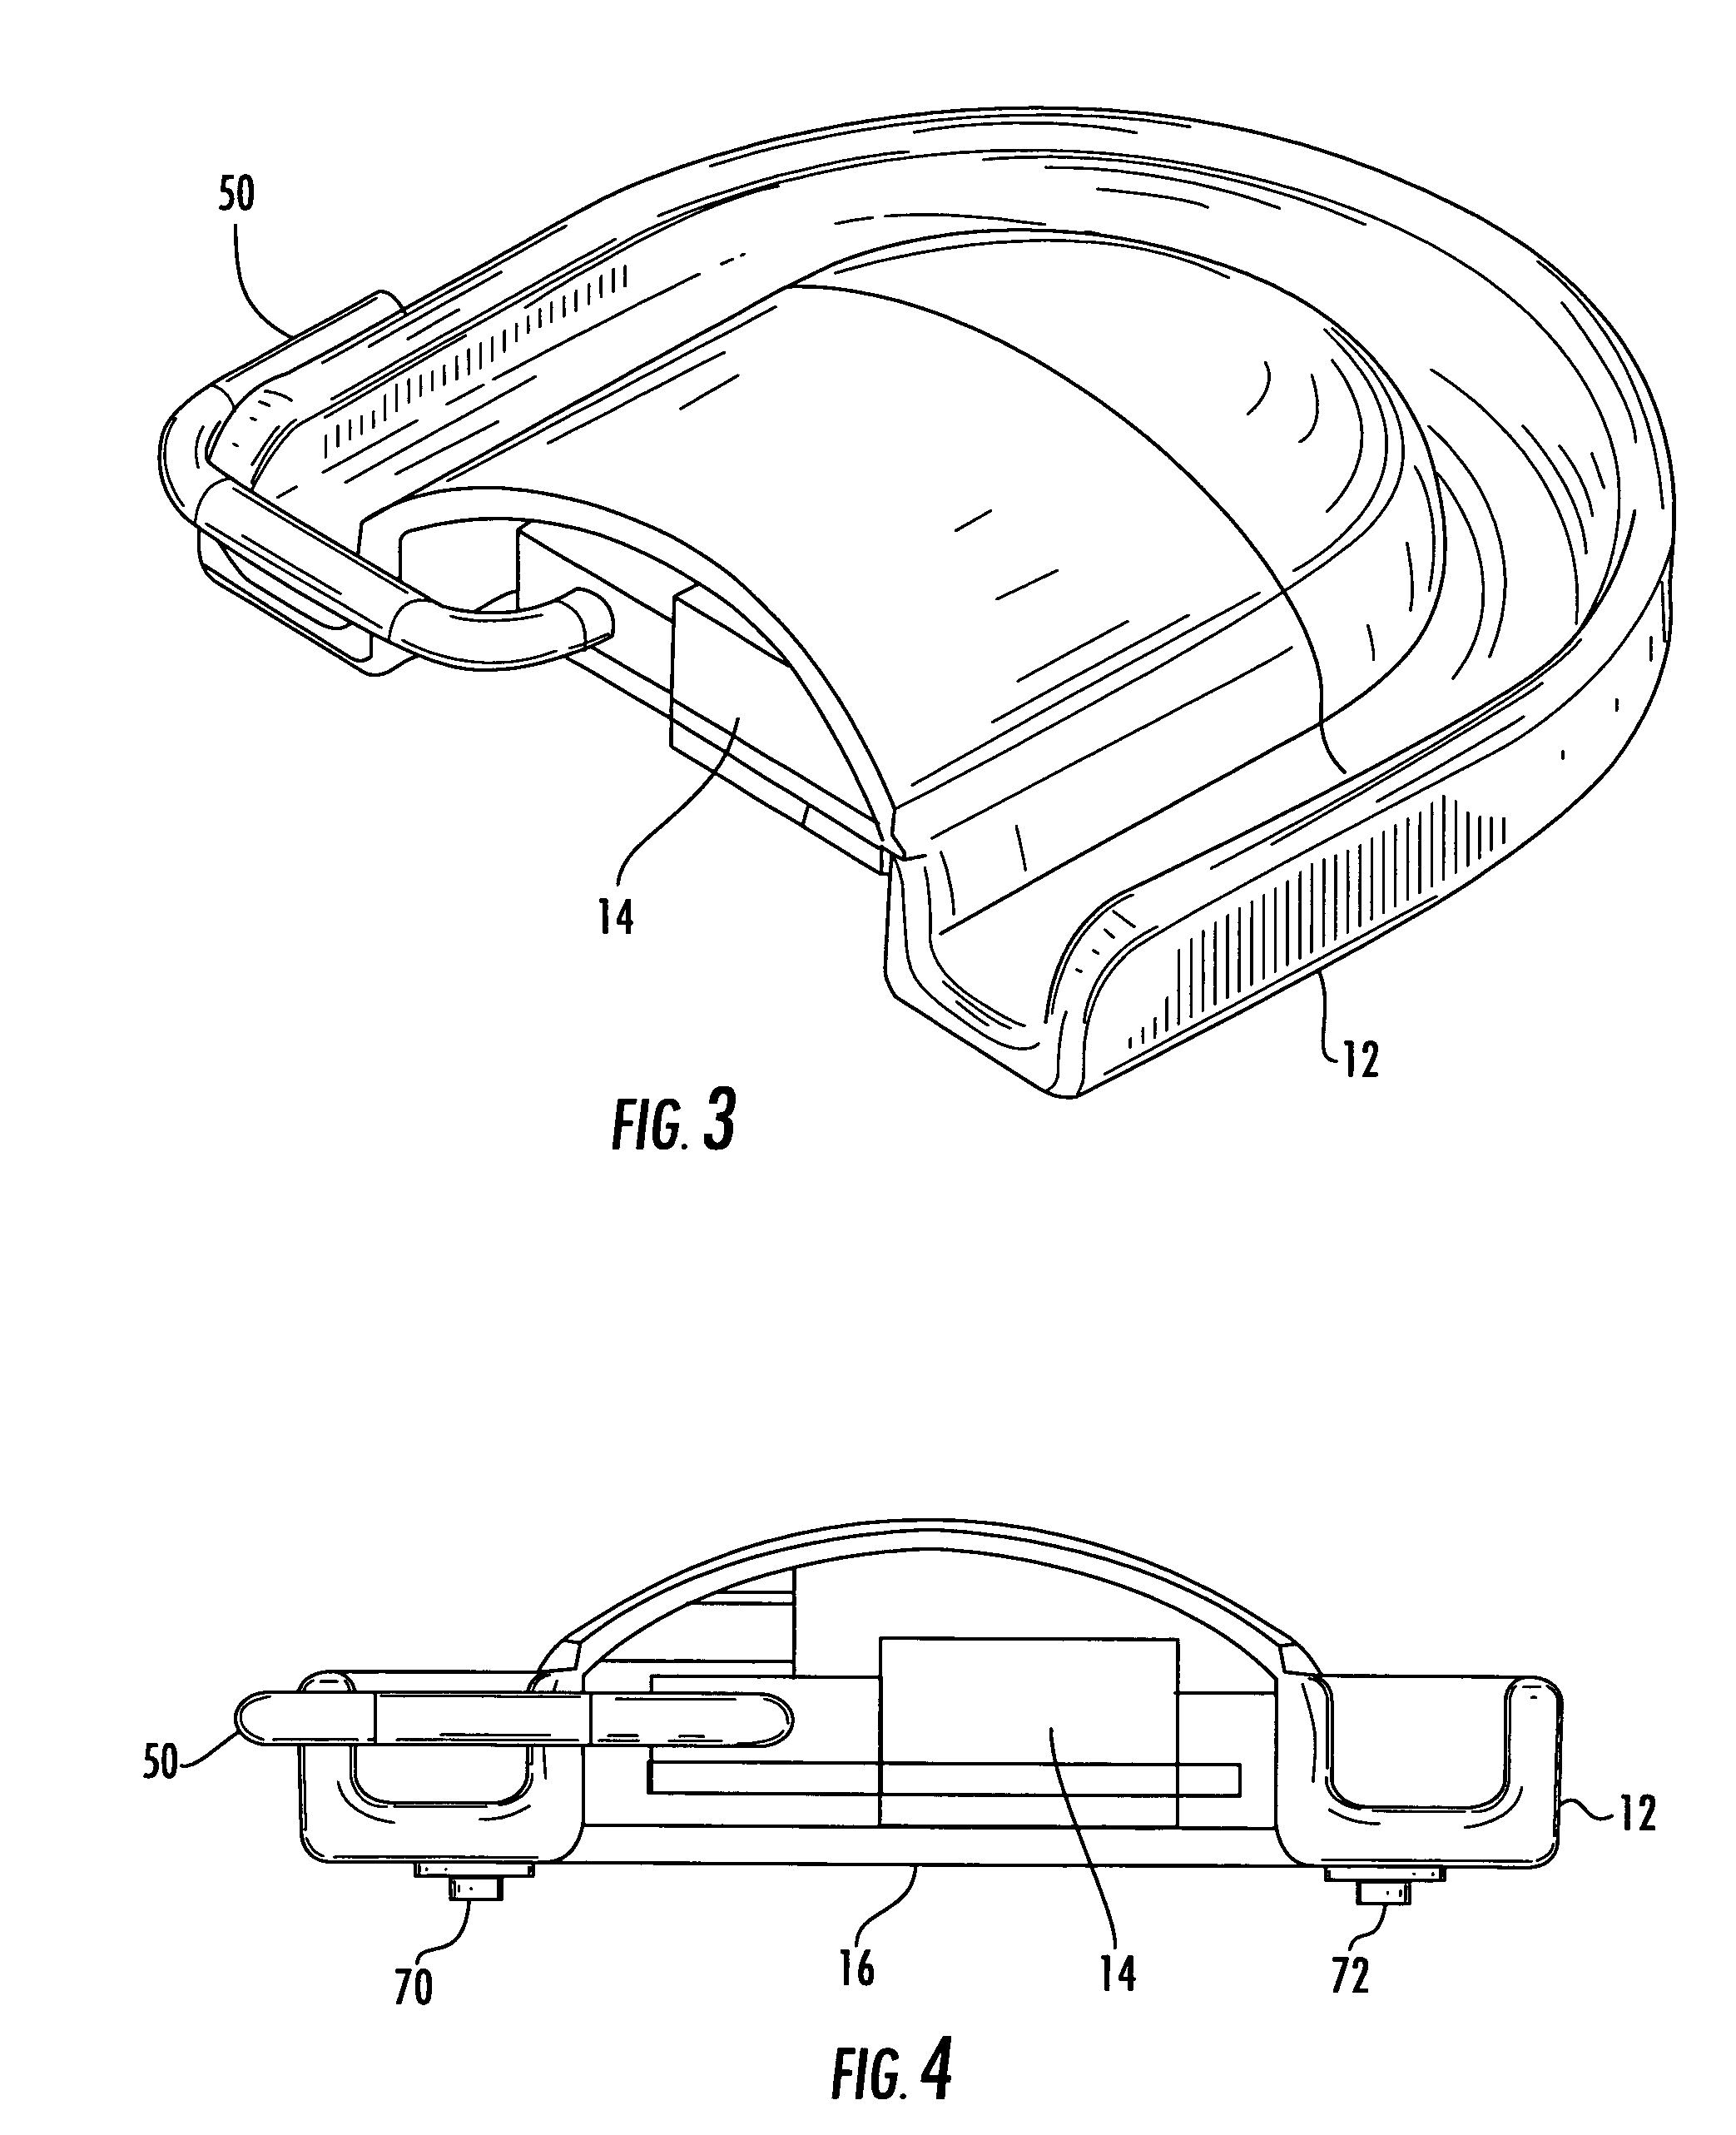 Mouth-operated computer input device and associated methods